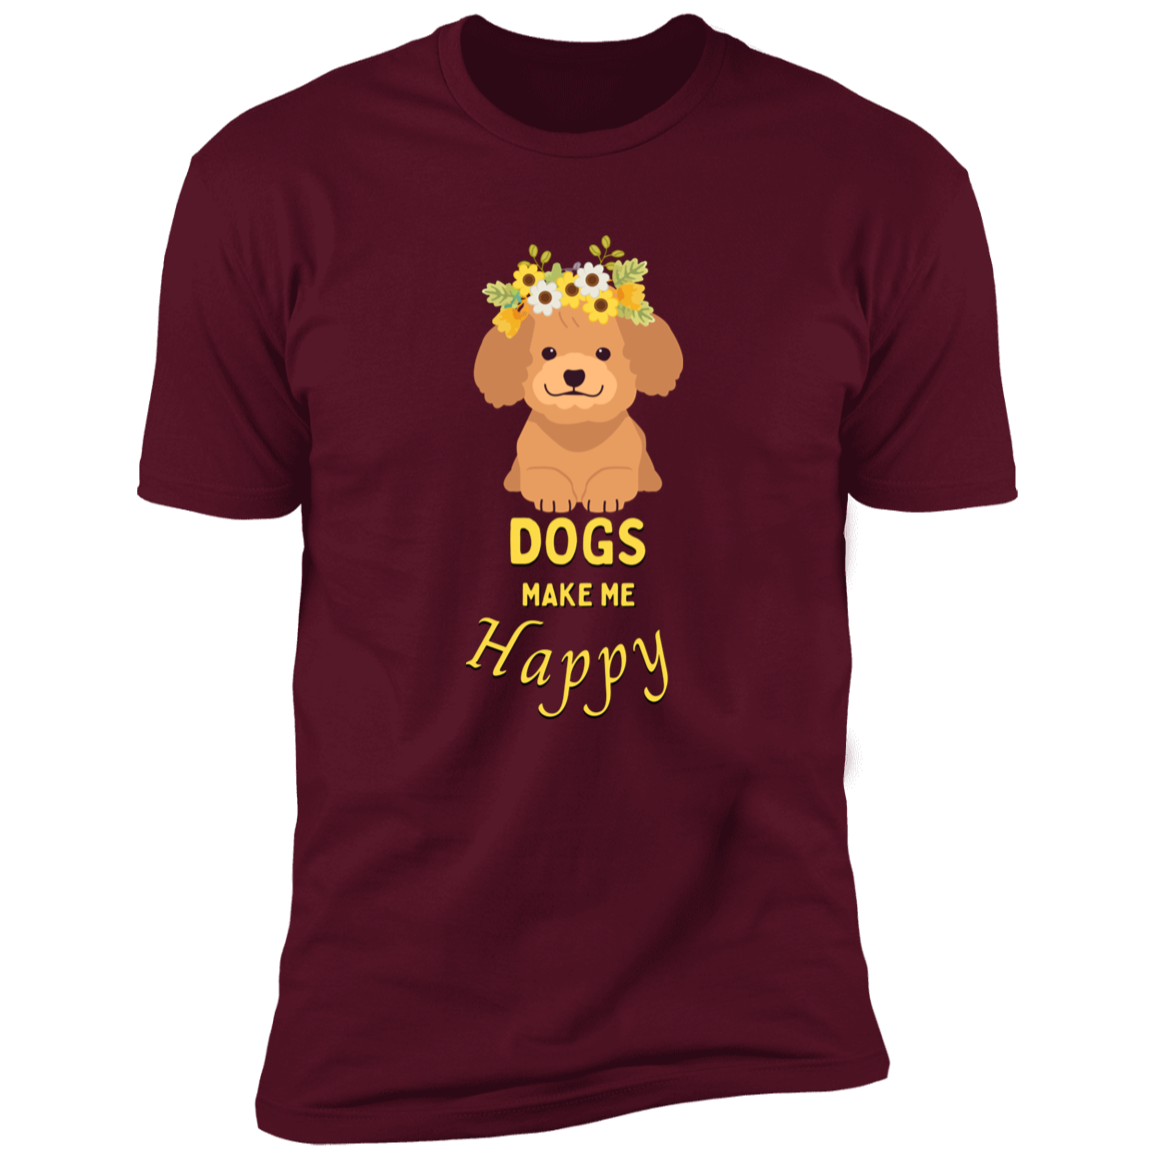 Dogs Make Me Happy t-shirt, funny dog shirt for humans, in maroon